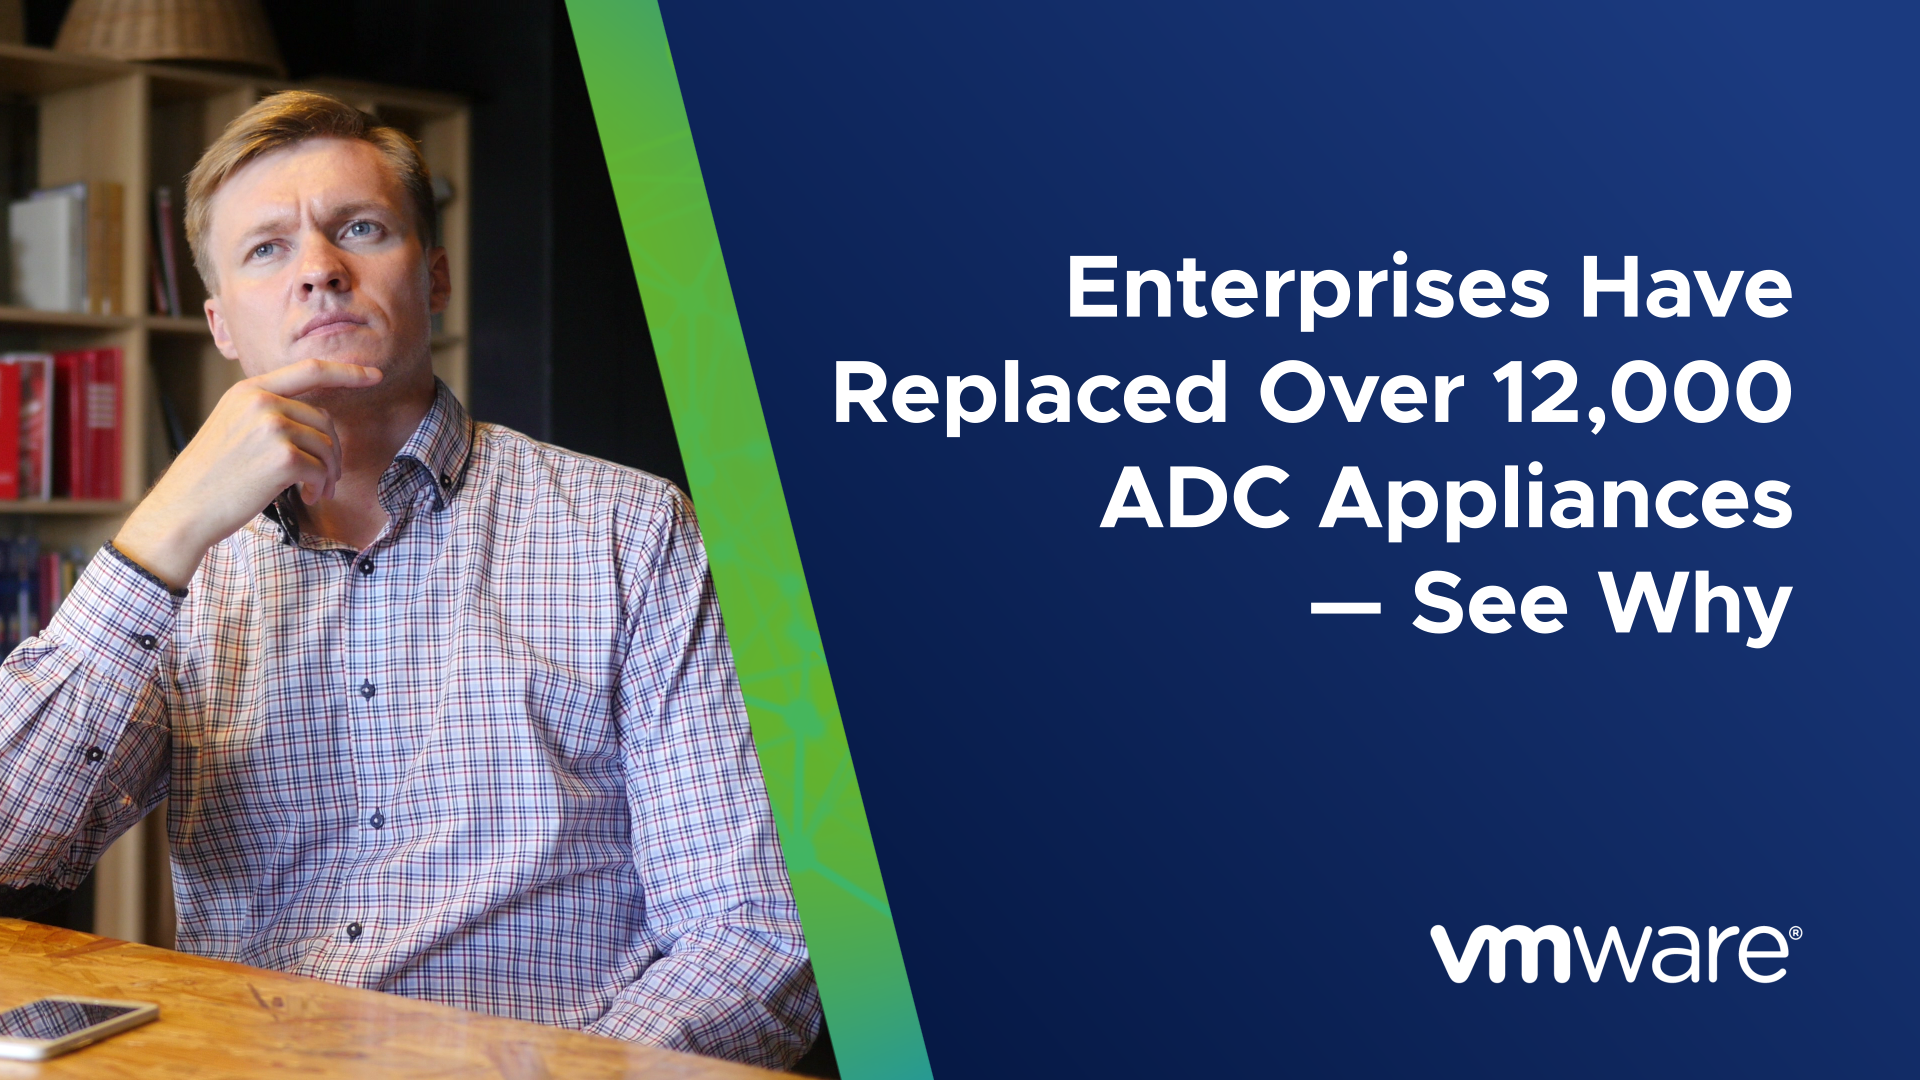 Enterprises have Replaced over 12000 ADC Appliances - See Why